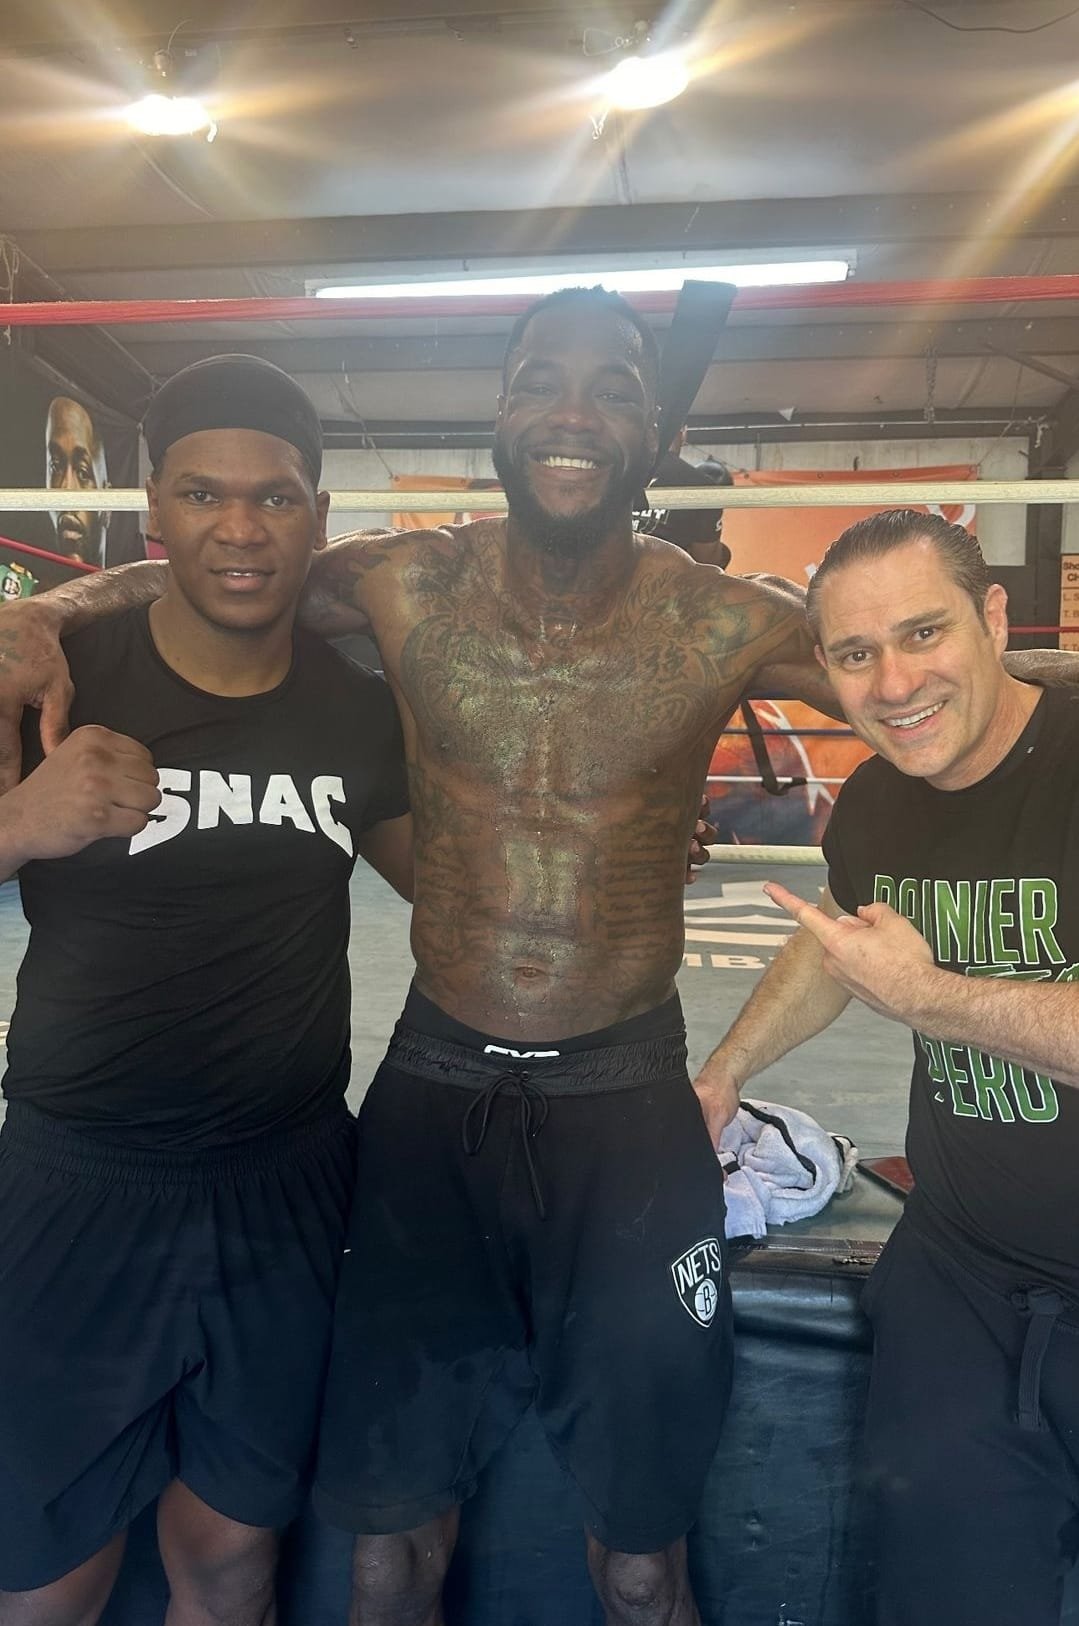 Look who stopped by the gym today!! @bronzebomber @bobsantosboxing @the_fear_pero #thechampishere #ironsharpensiron #fyp #letsgo #boxlabpromotions #boxeo #boxing #training #workout #wethebest